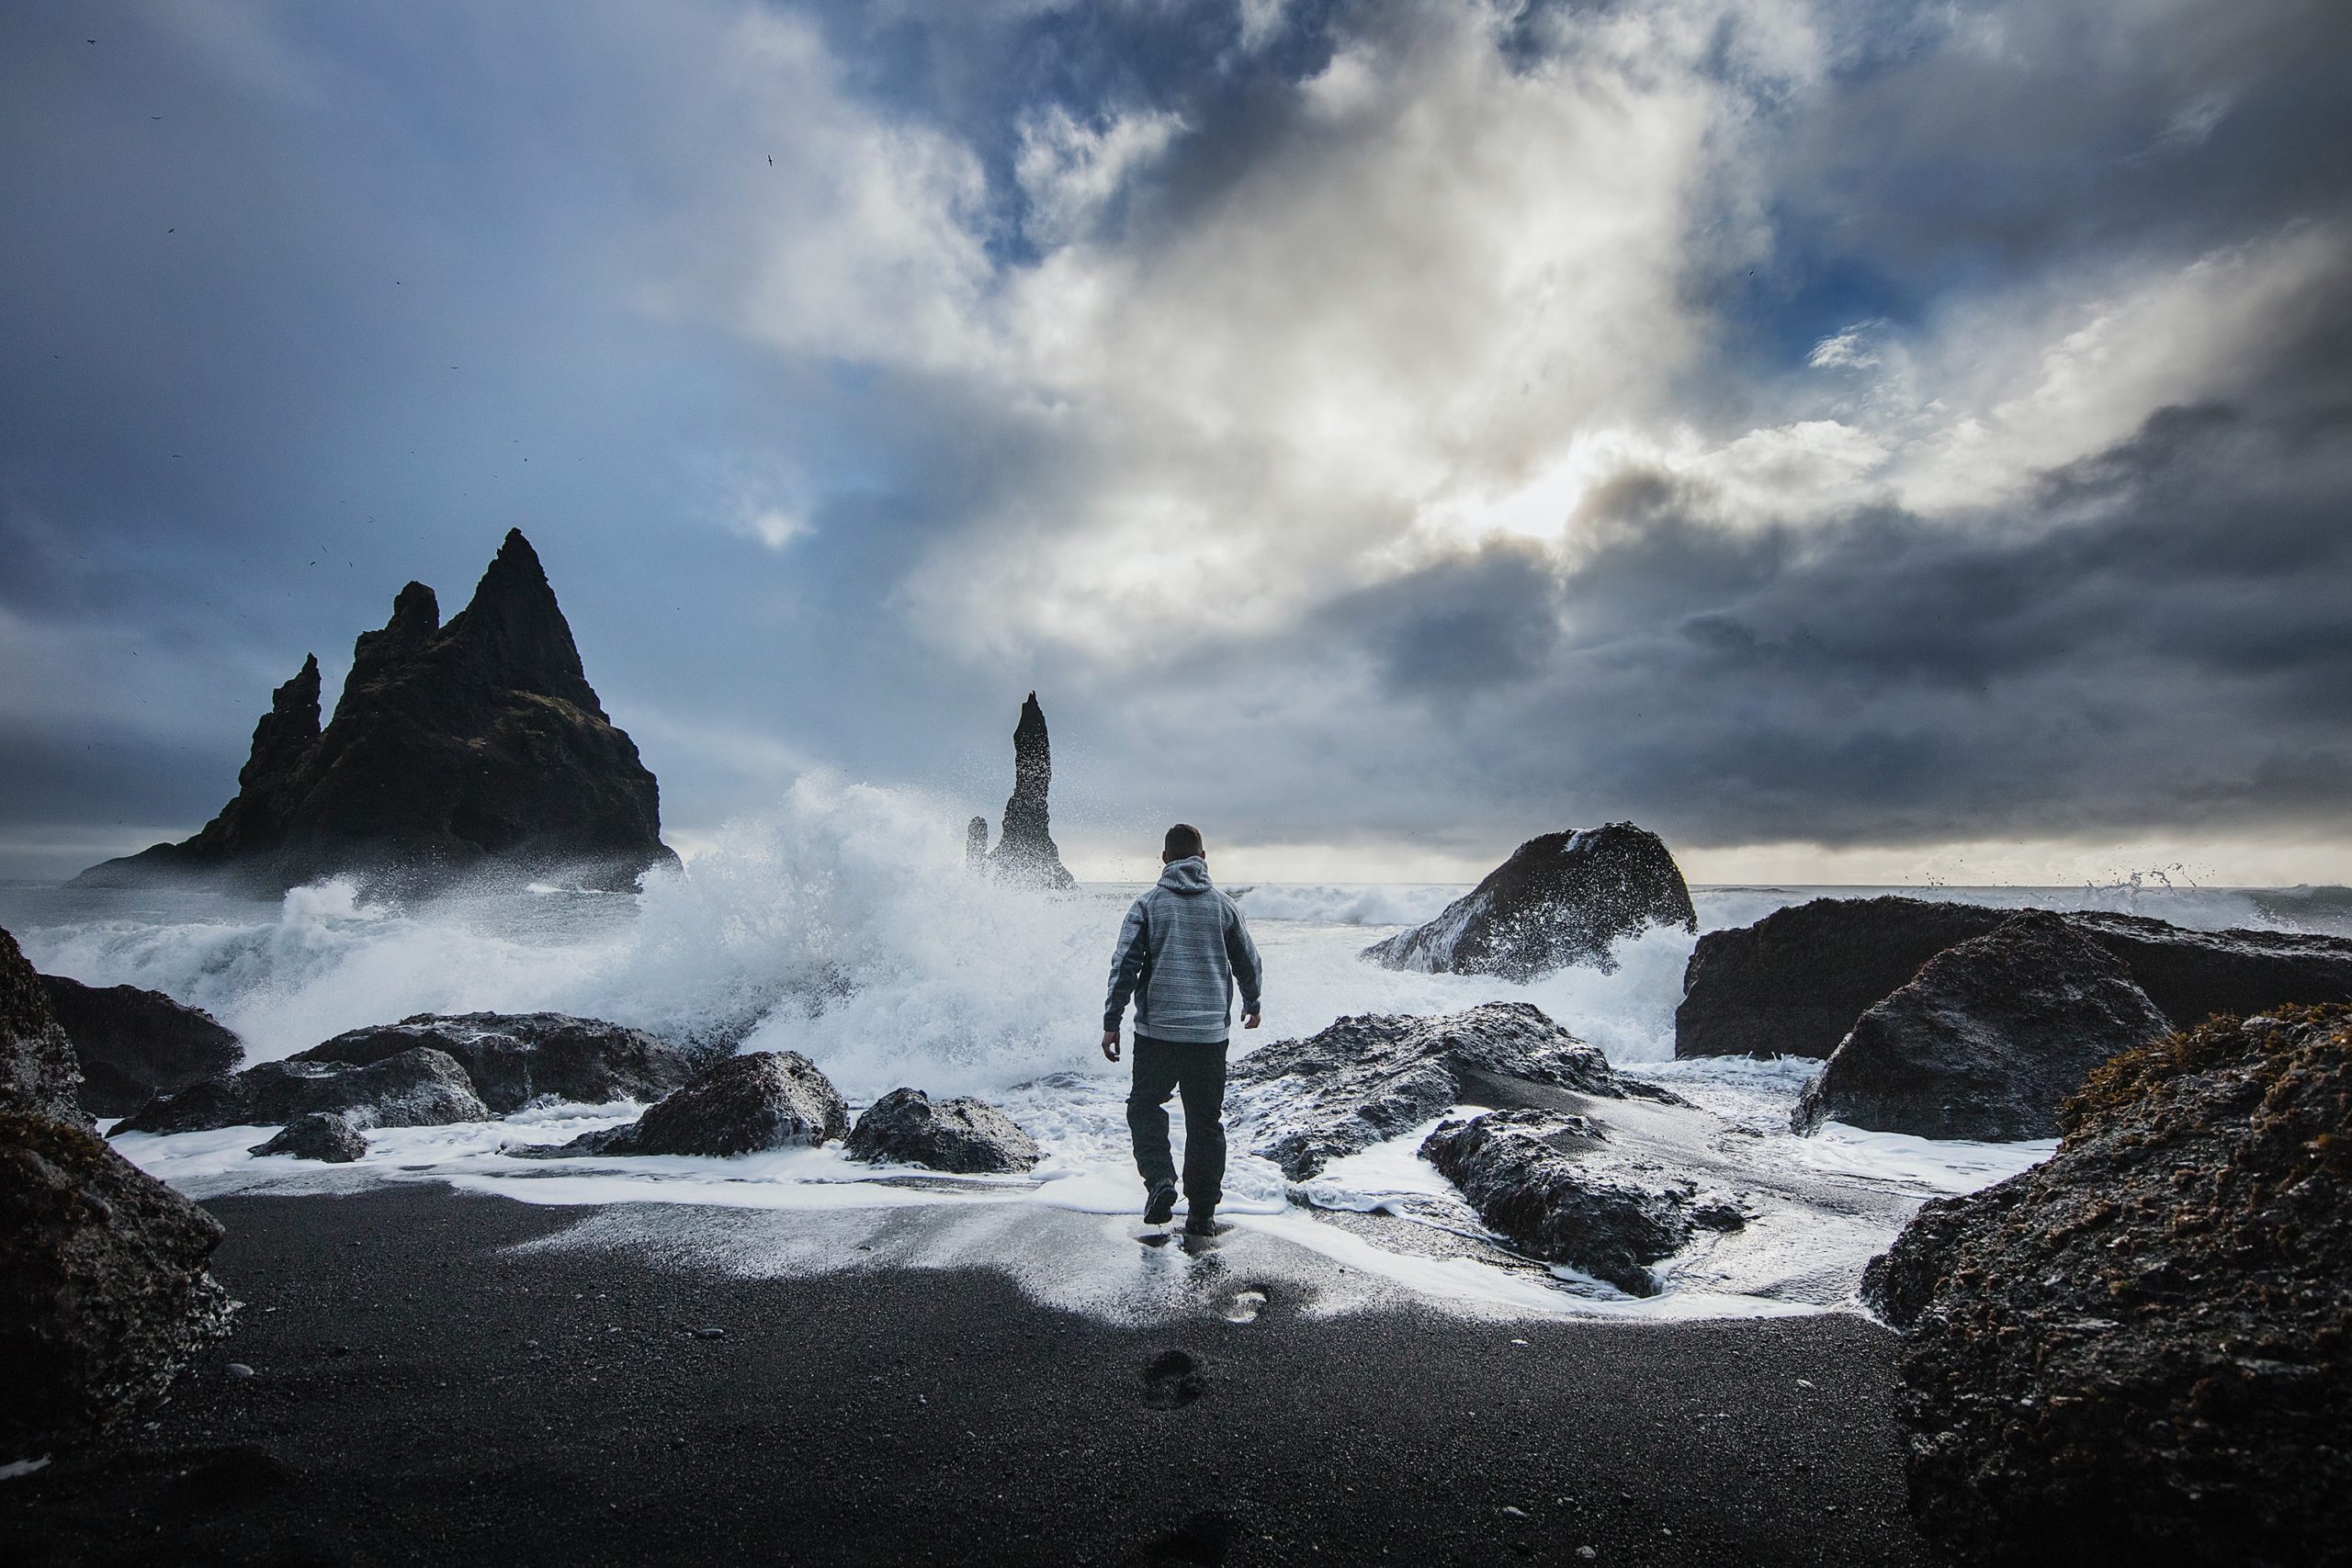 A man standing too close to the shoreline at Reynisfjara beach in Iceland